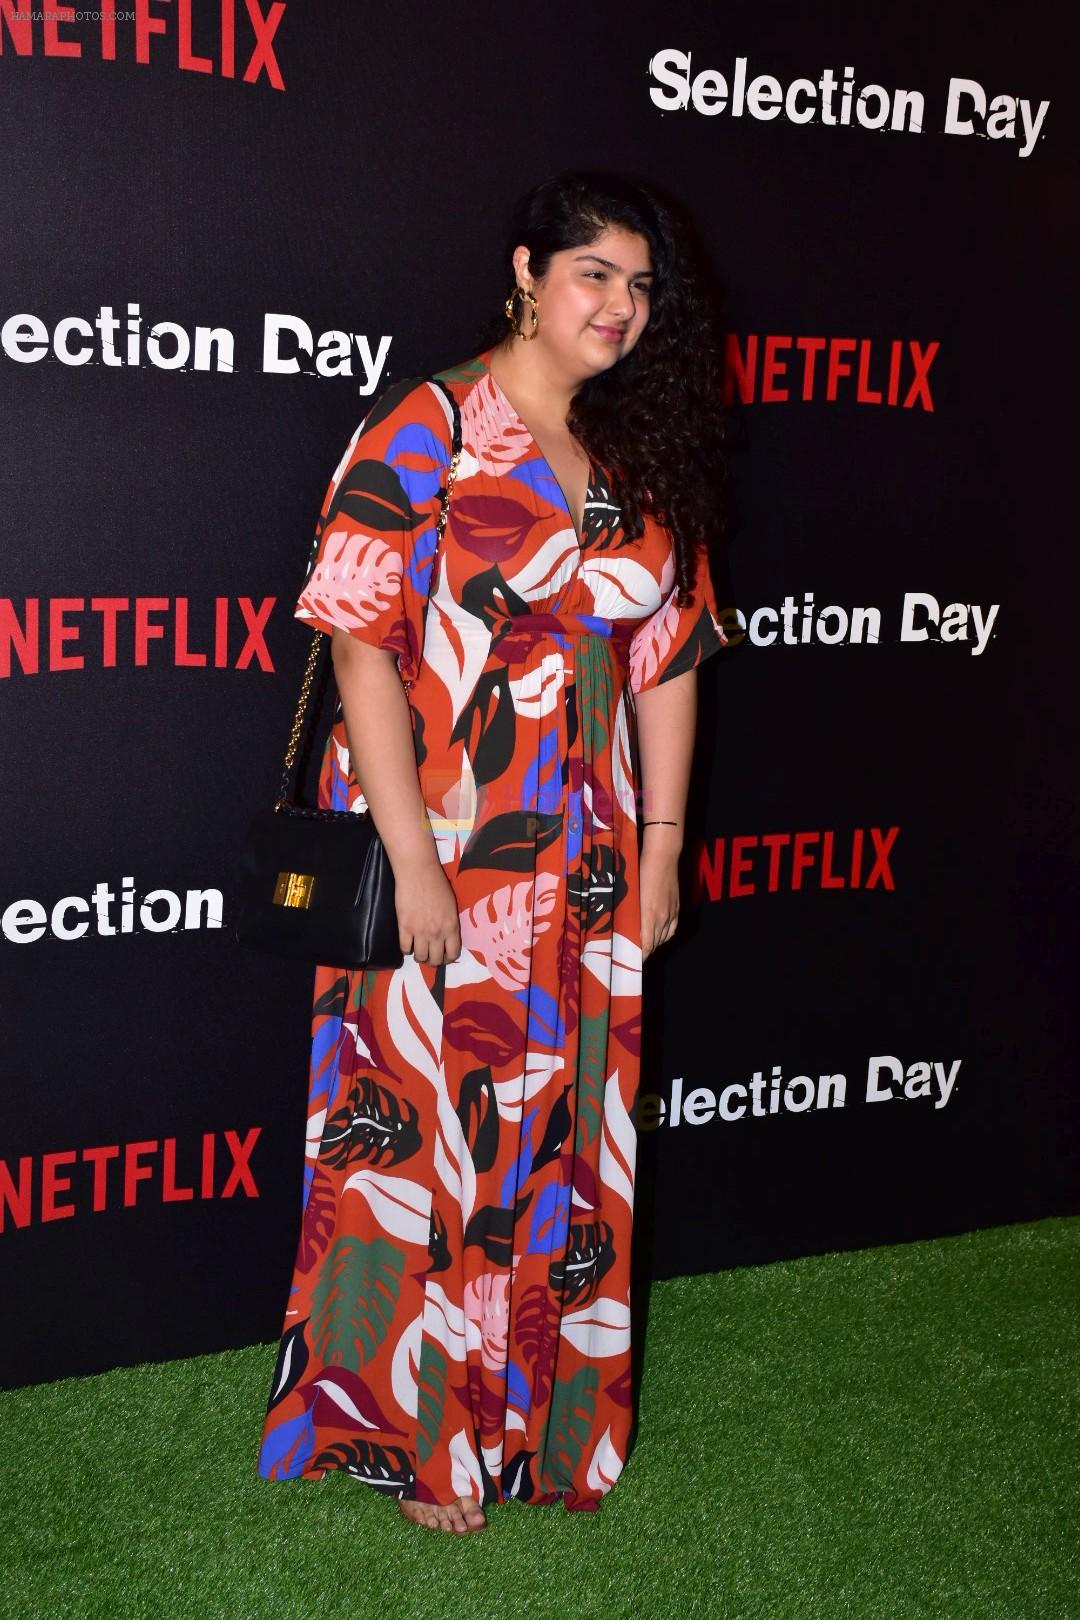 Anshula Kapoor at the Red Carpet of Netfix Upcoming Series Selection Day on 18th Dec 2018